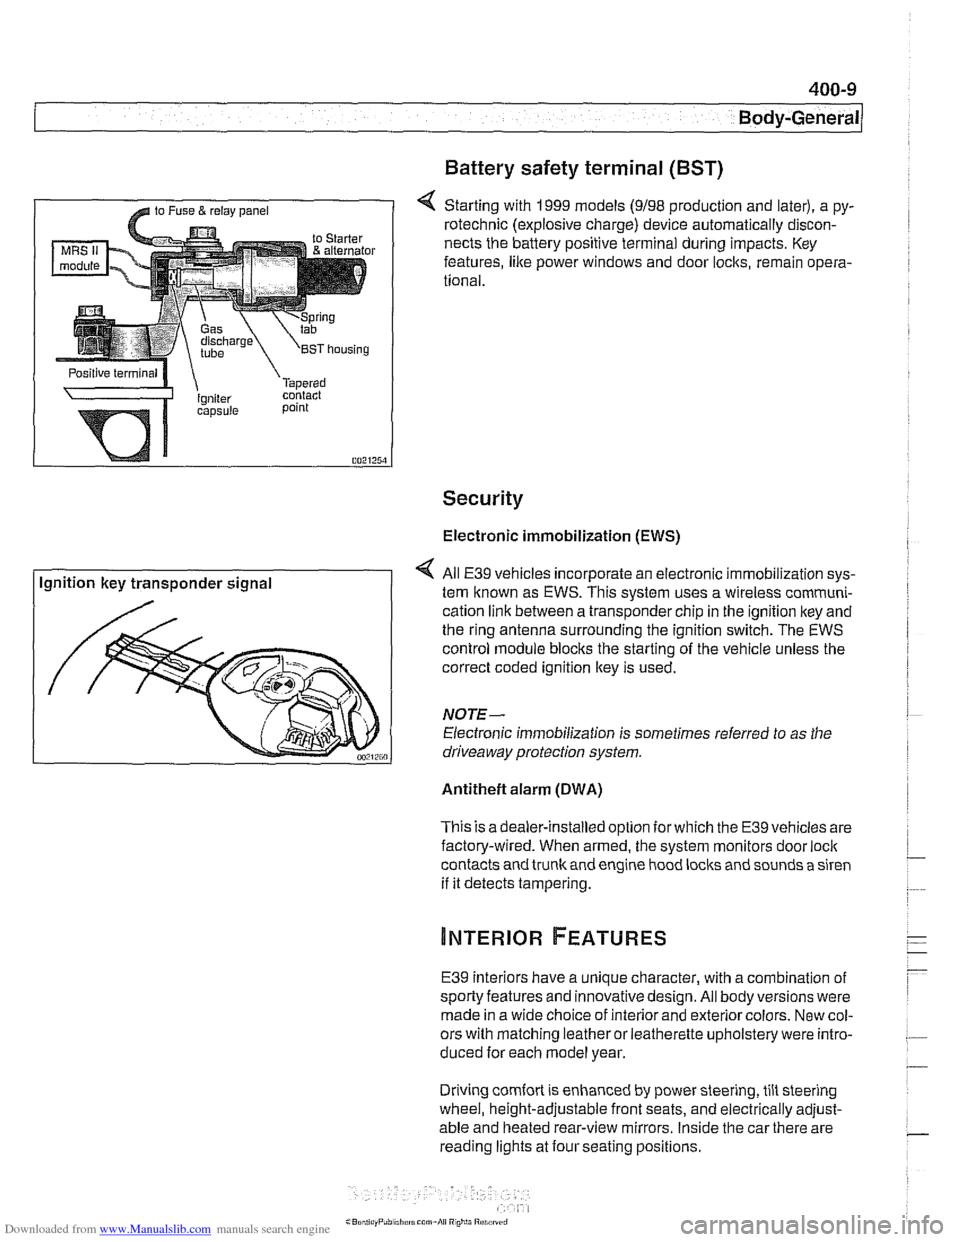 BMW 528i 1997 E39 Workshop Manual Downloaded from www.Manualslib.com manuals search engine 
400-9 
Body-General 
Battery  safety terminal 
(BST) 
4 Starting  with 1999 models (9198 production  and later), a py- 
rotechnic  (explosive 